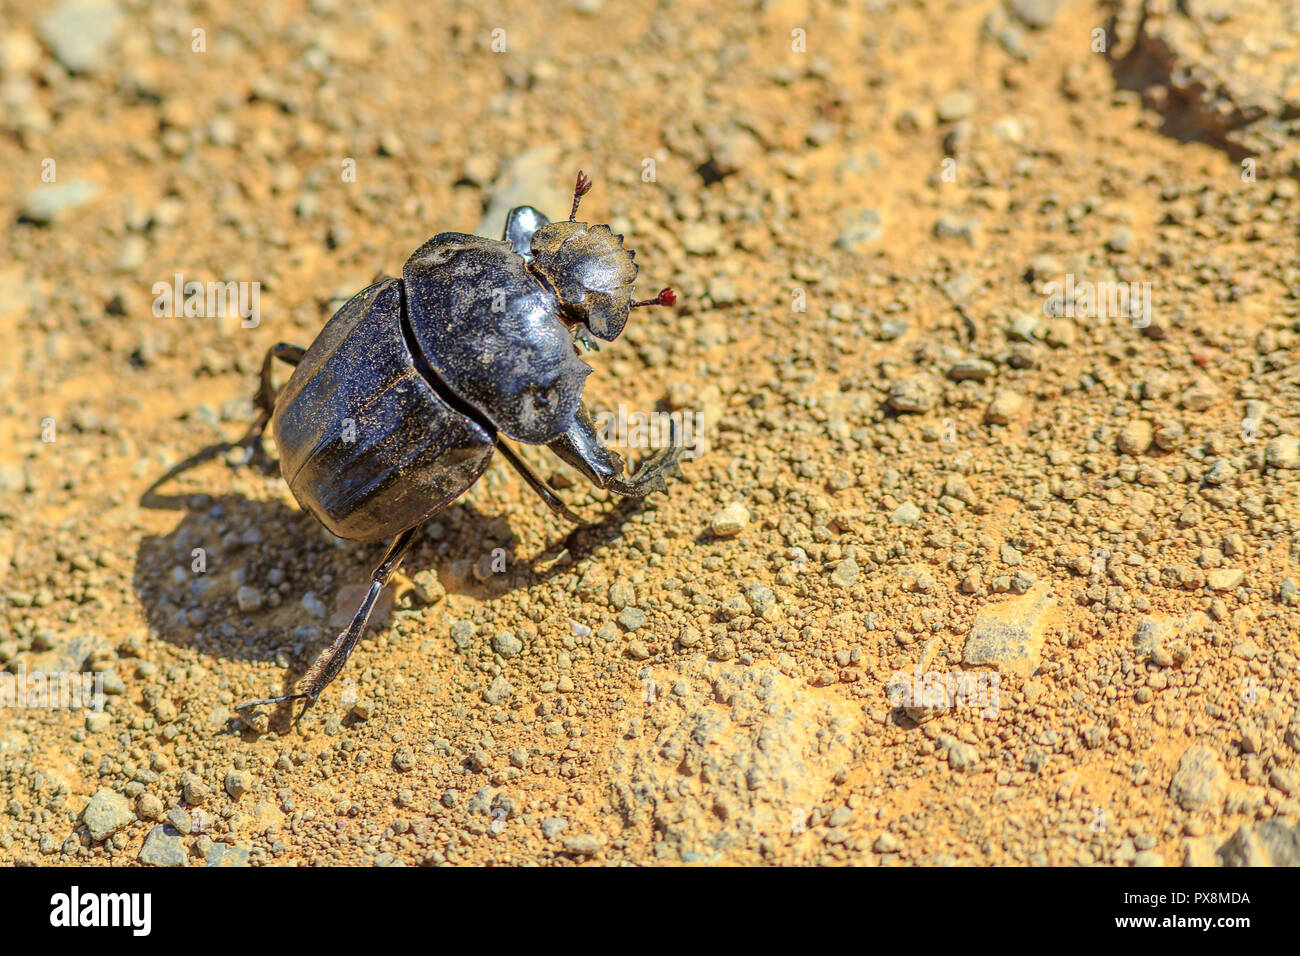 Closeup of one dung beetle while walking on arid land in natural habitat, South Africa. Blurred background. Stock Photo